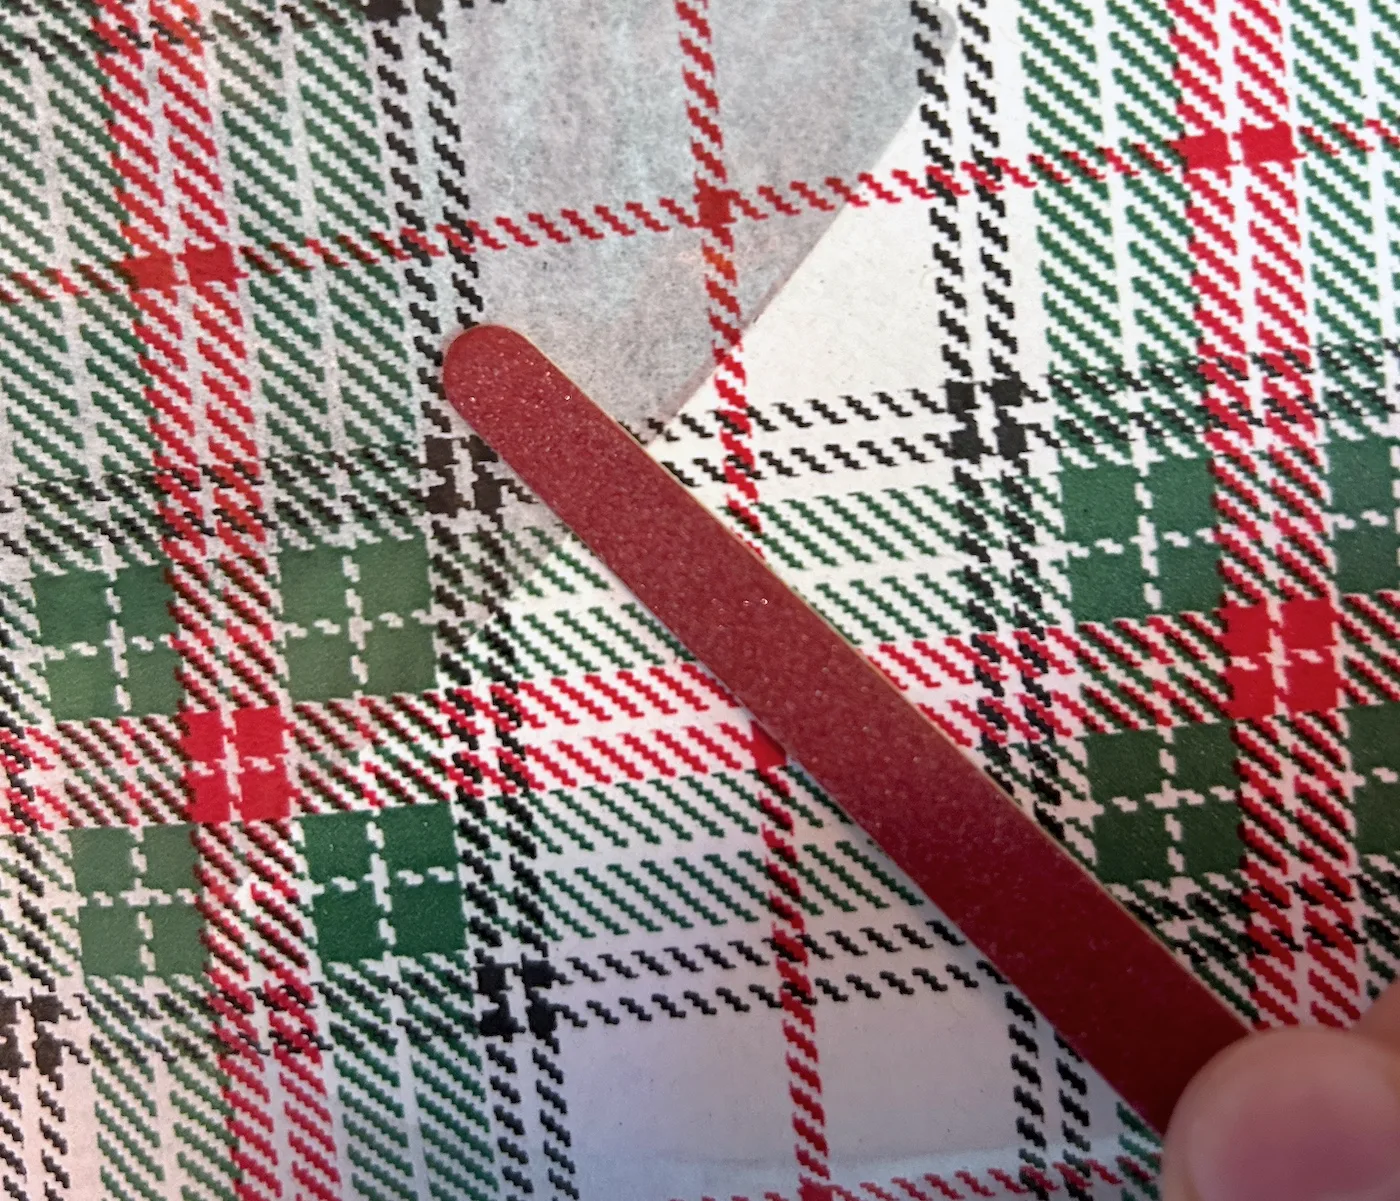 Filing the edge of a plaid napkin with an emery board